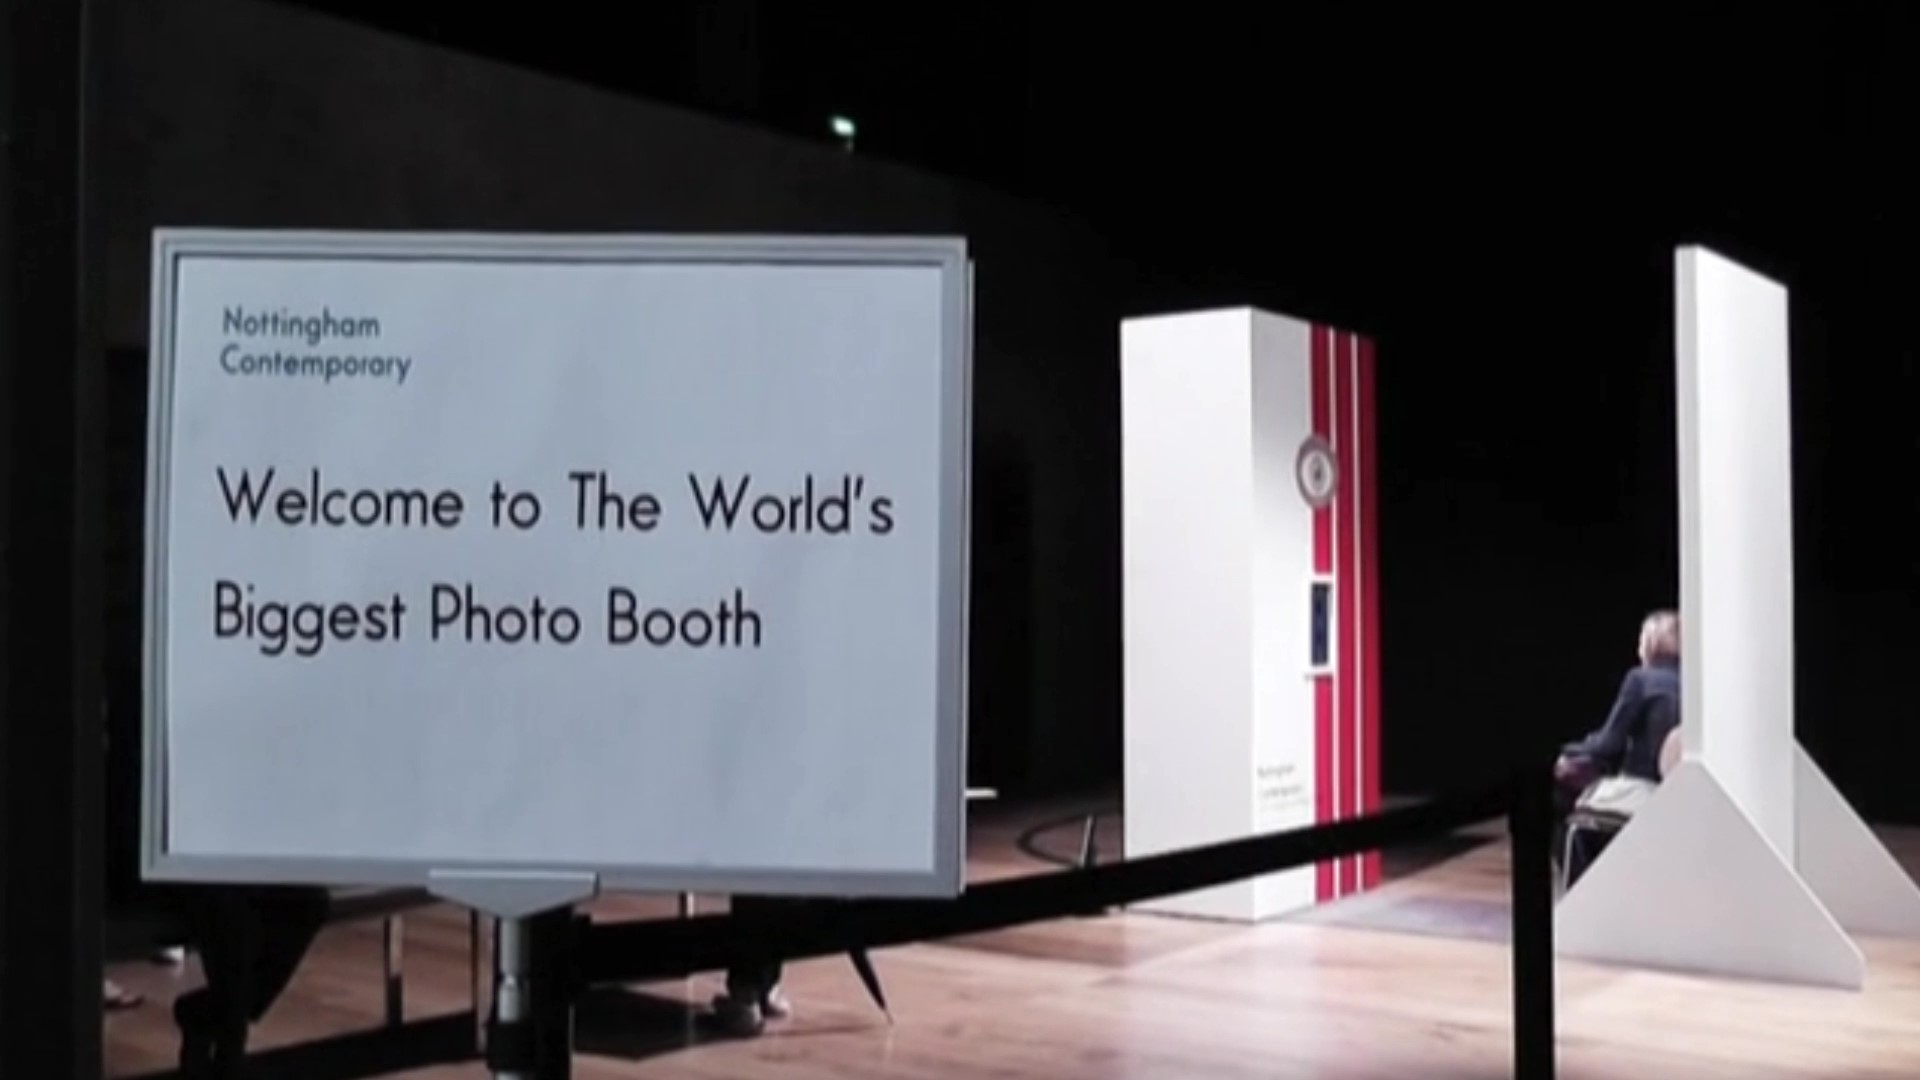 The Worlds Largest Photo Booth – frame at 1m14s